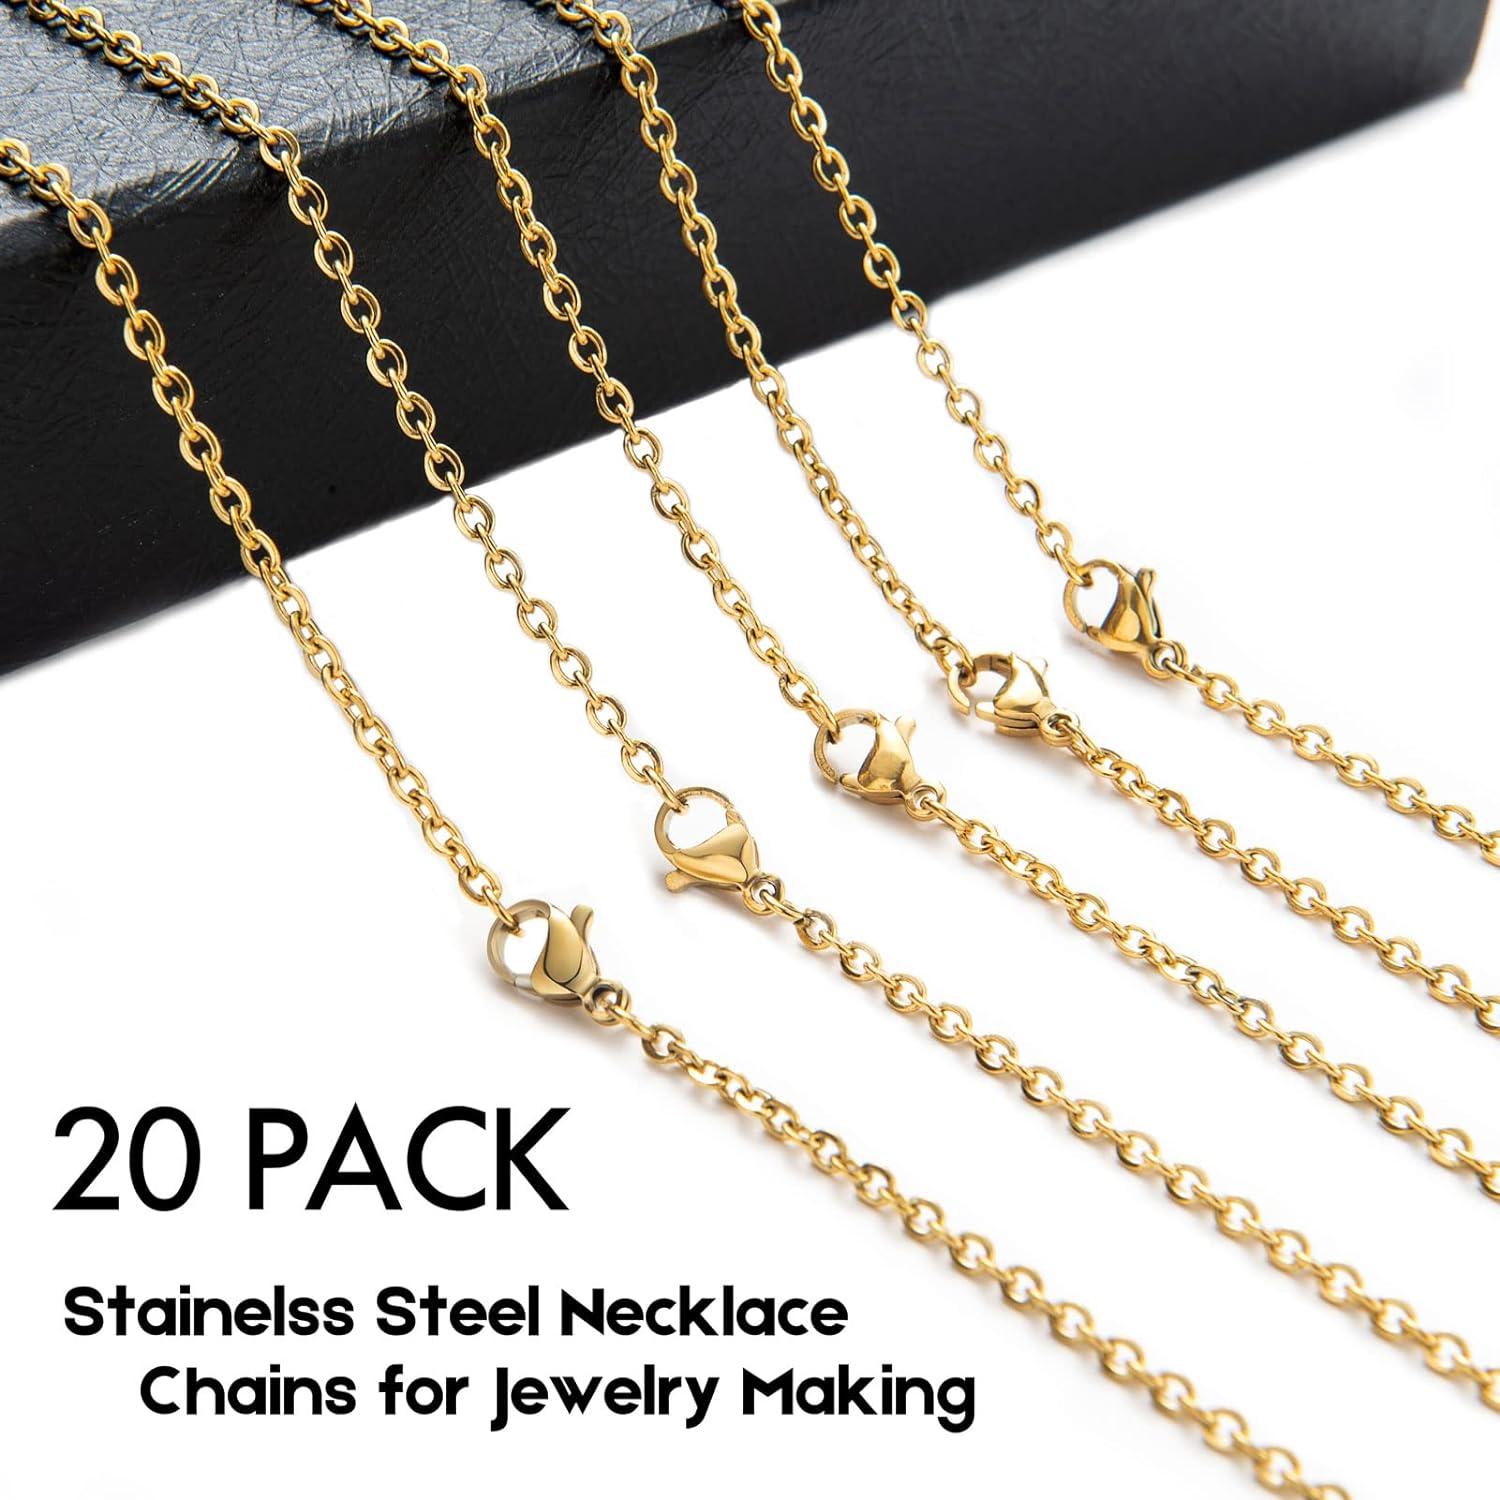 Necklace chains for jewelry making